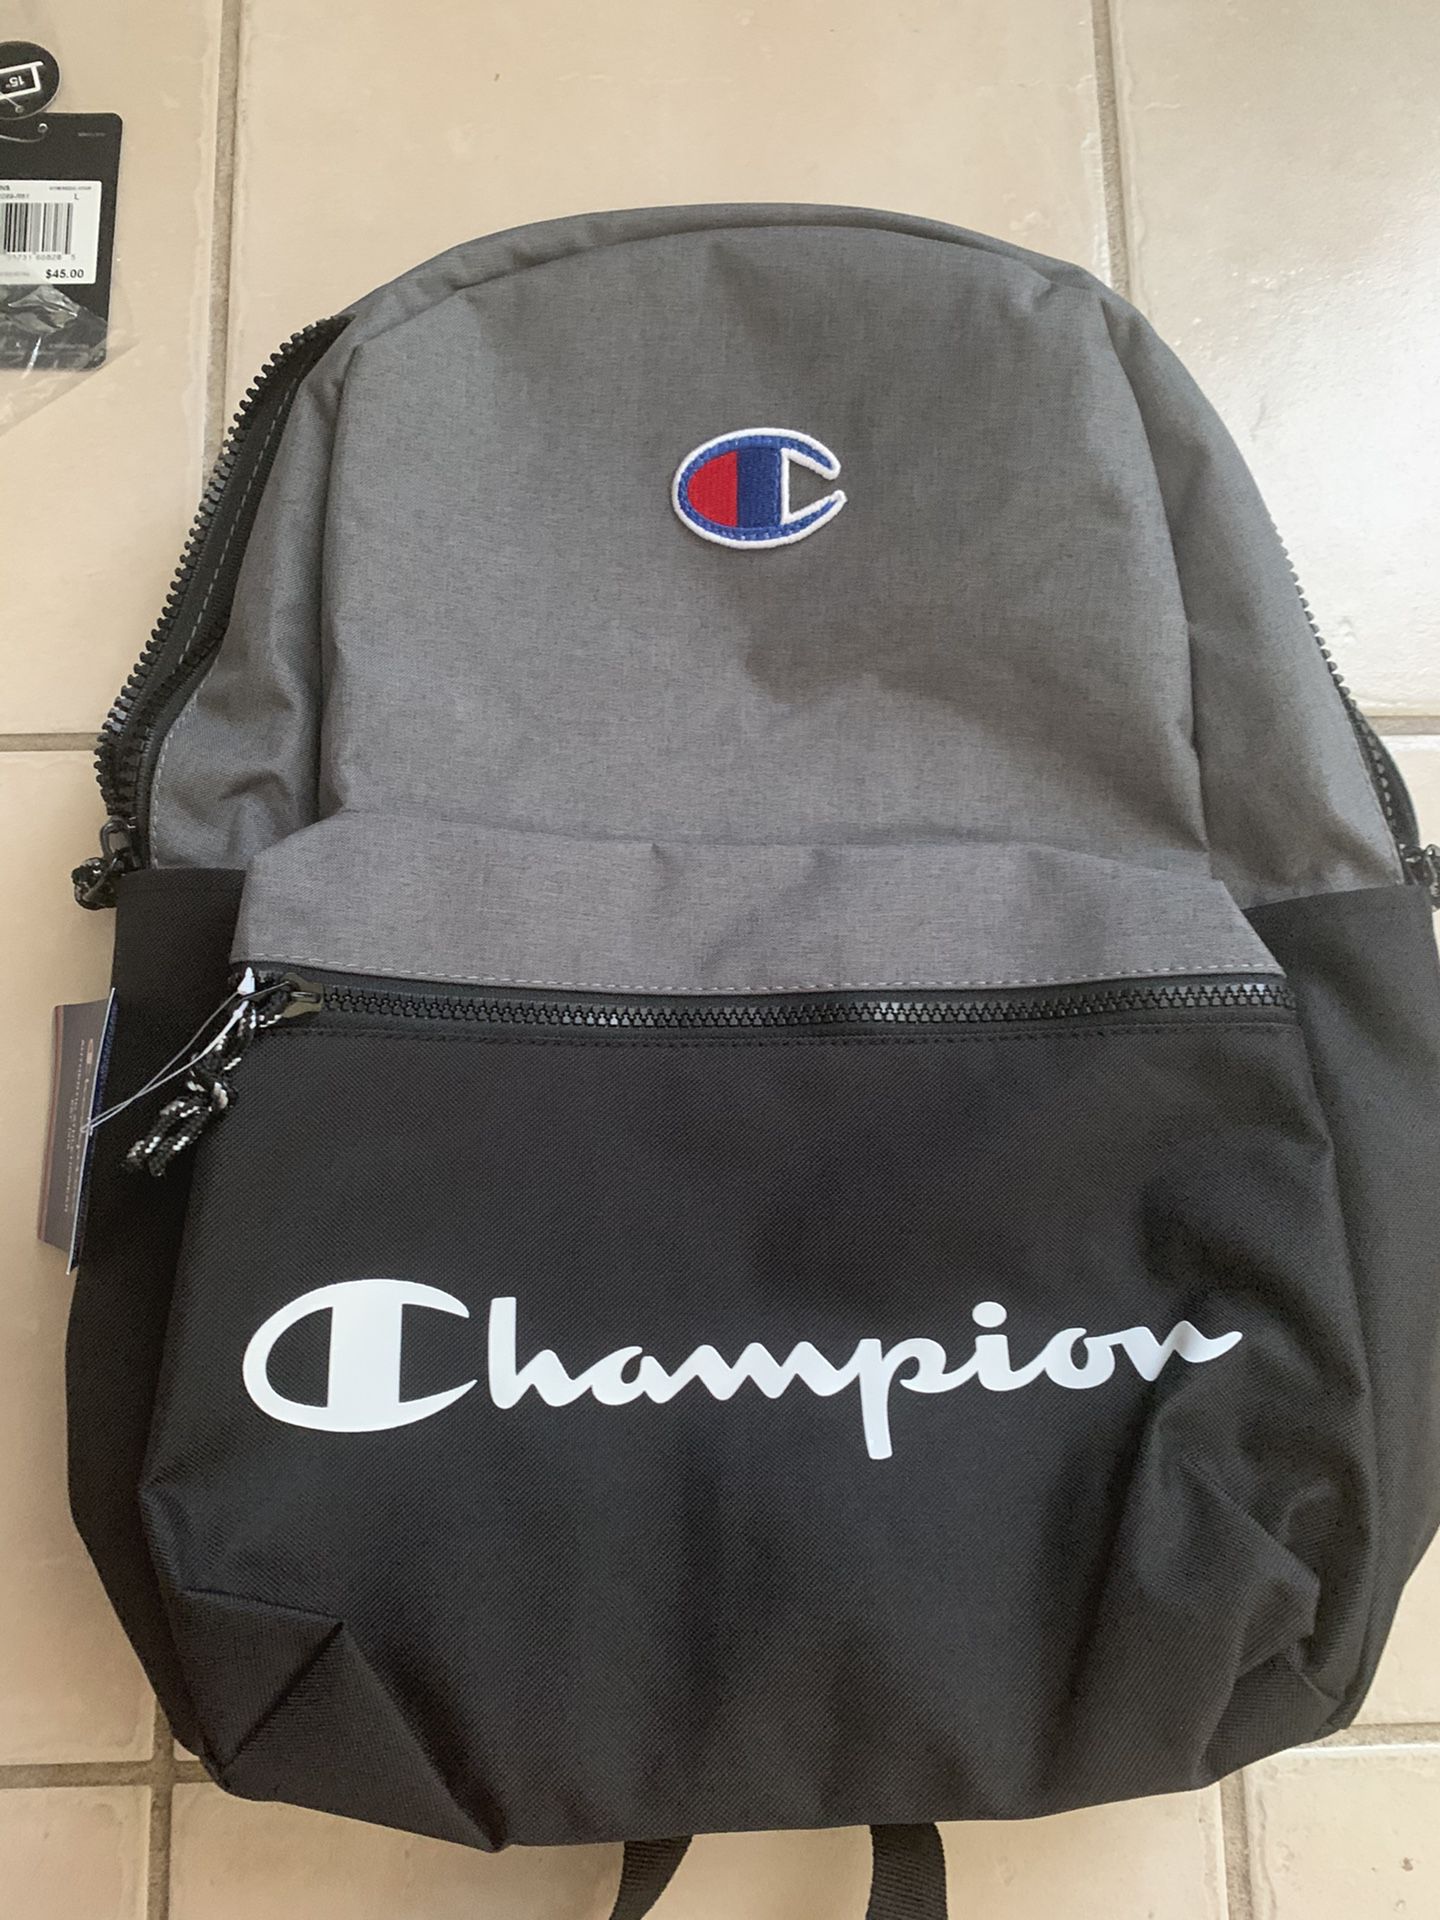 Championship adult backpack. New with tag. $30 firm